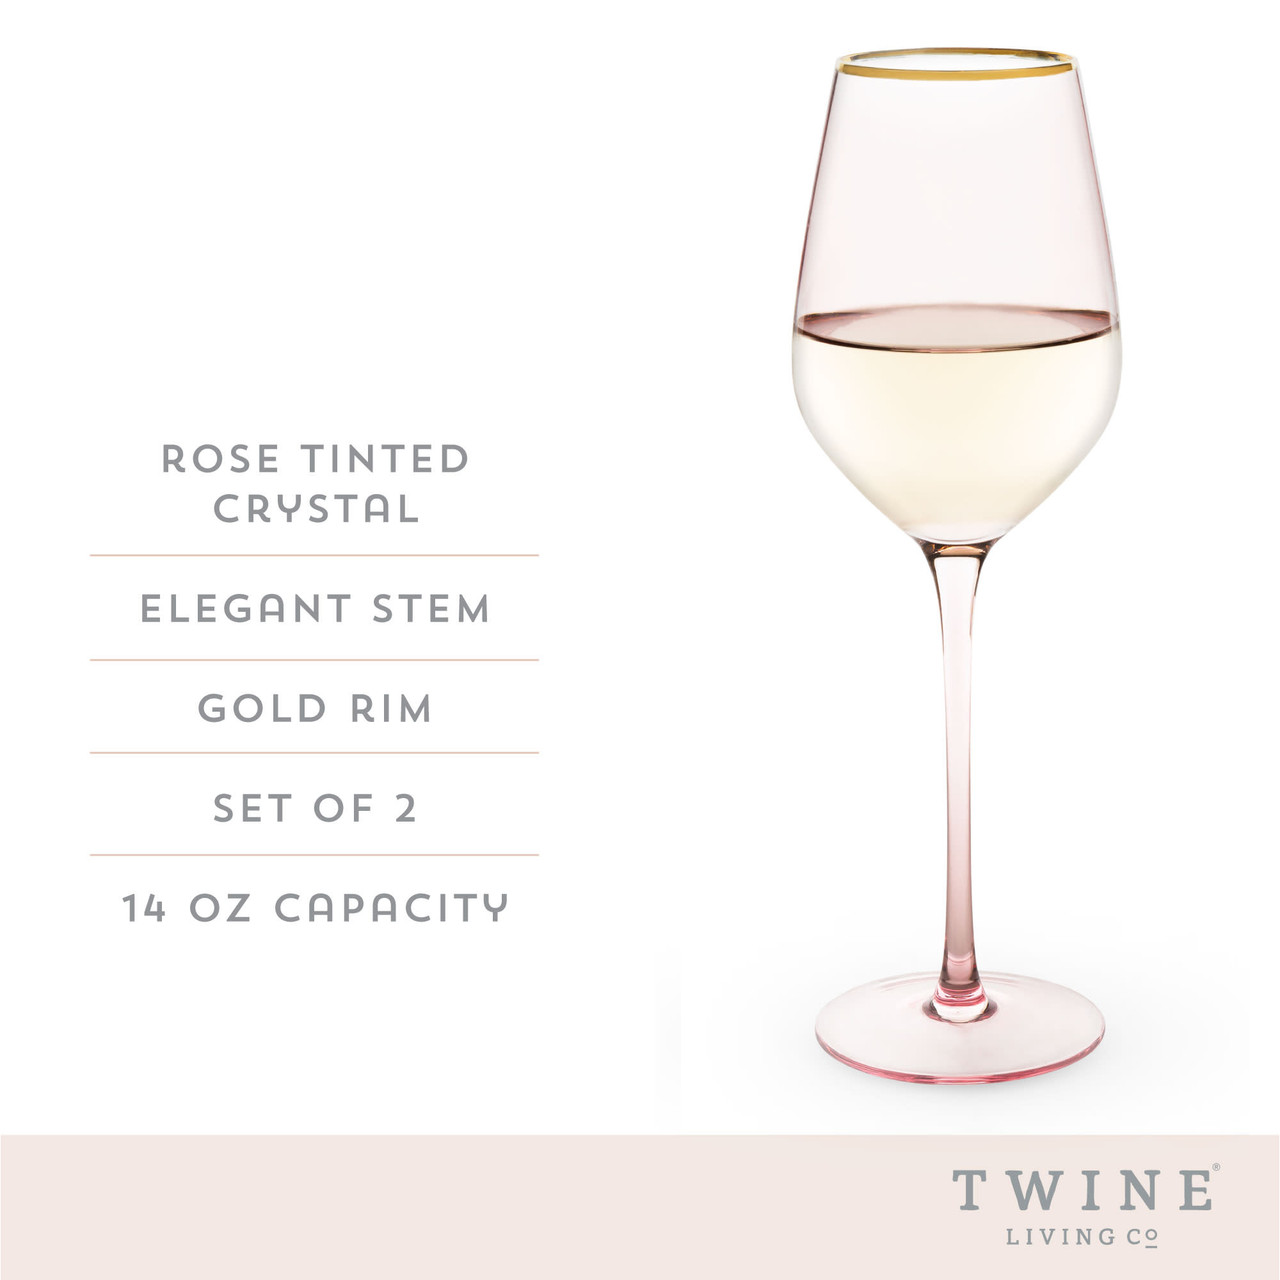 Twine Living Co Rose Crystal White Wine Glasses - Set of 2 - New